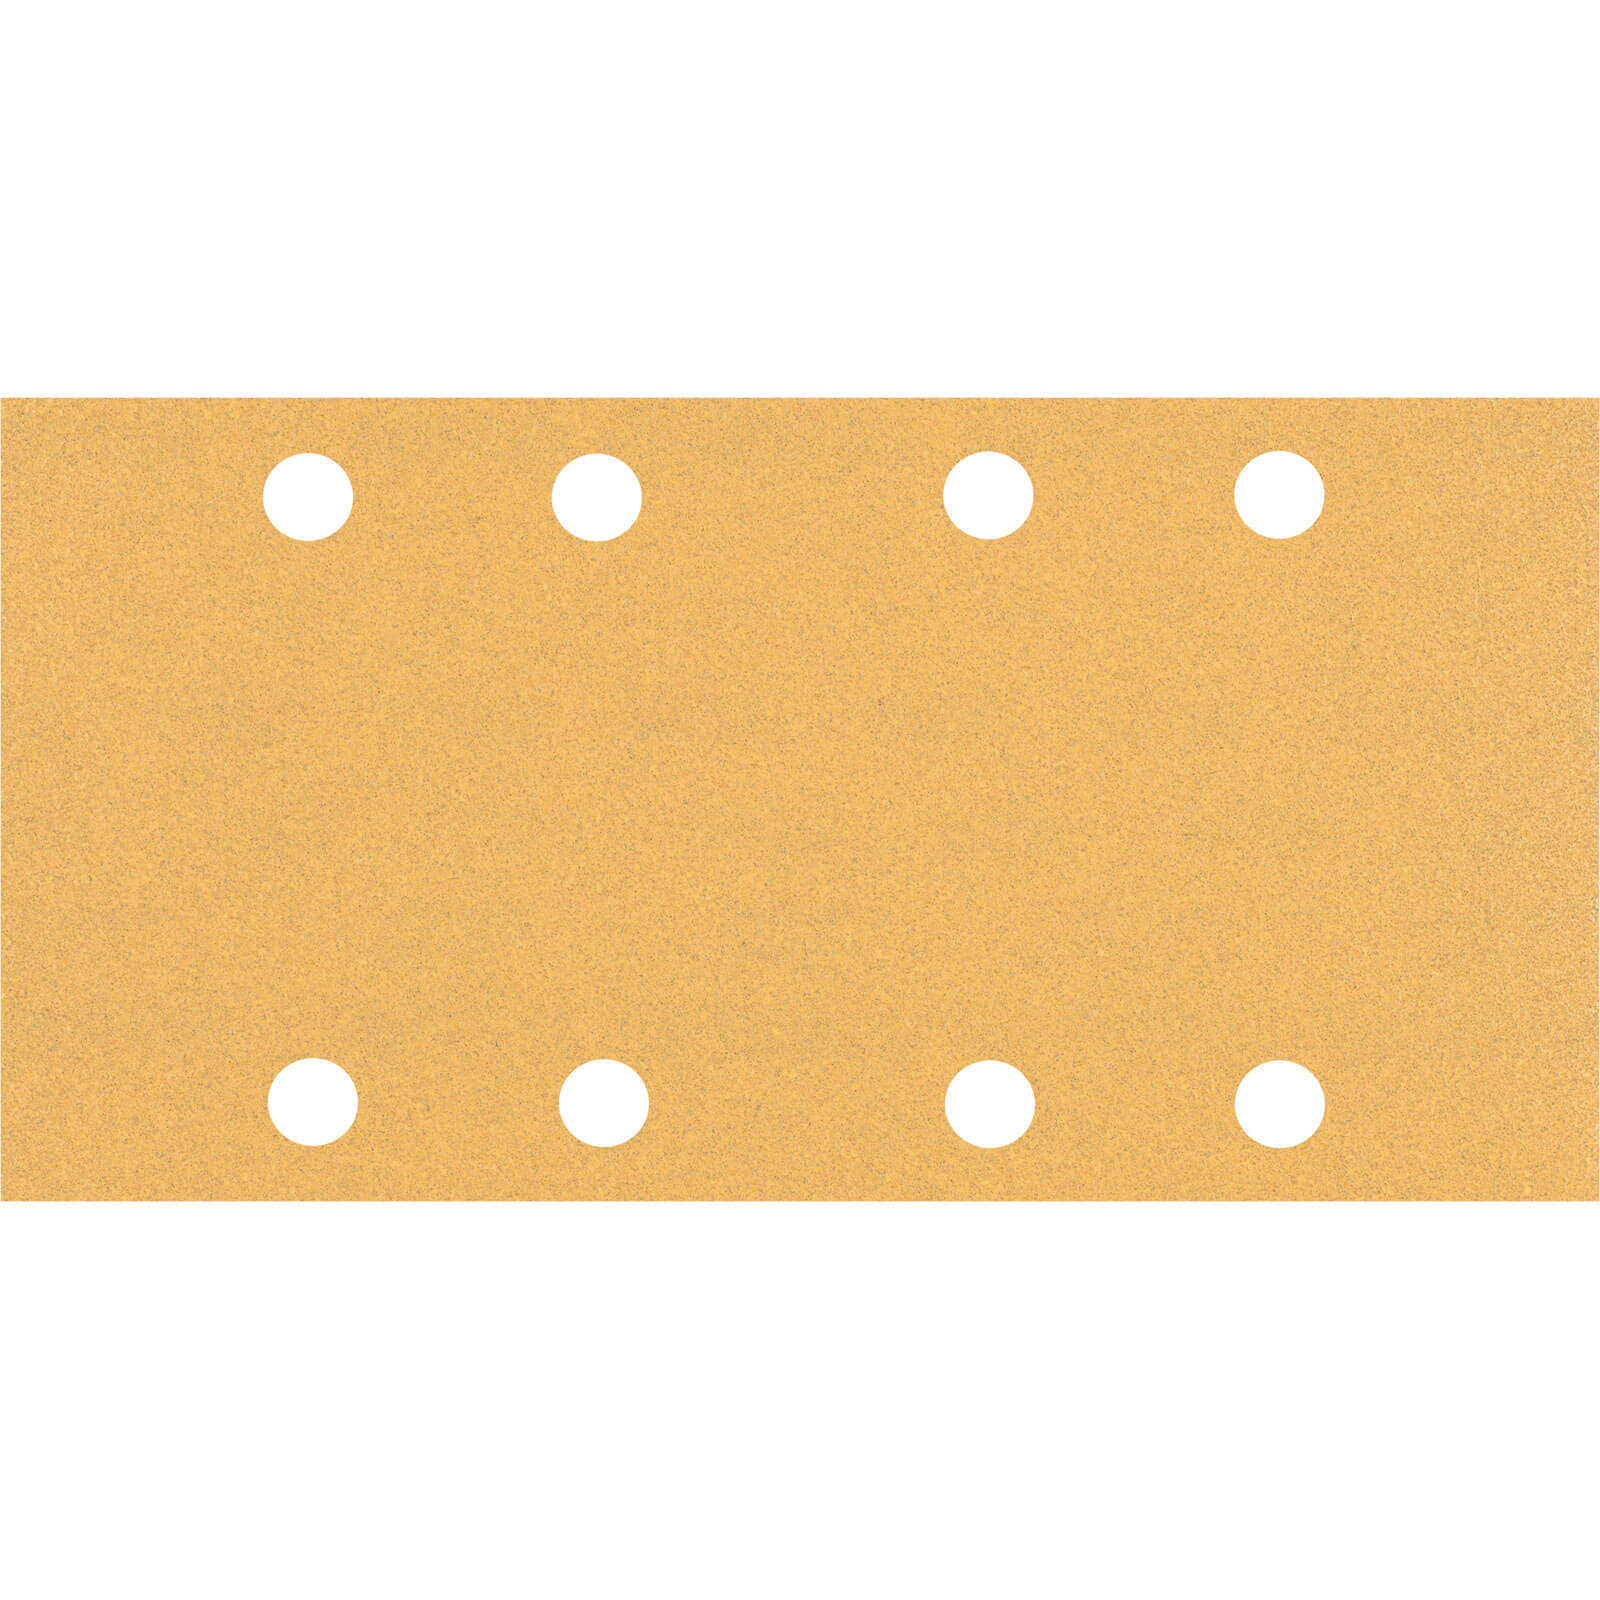 Image of Bosch Expert C470 Punched Hook and Loop Sanding Sheets 93mm x 186mm 100g Pack of 10